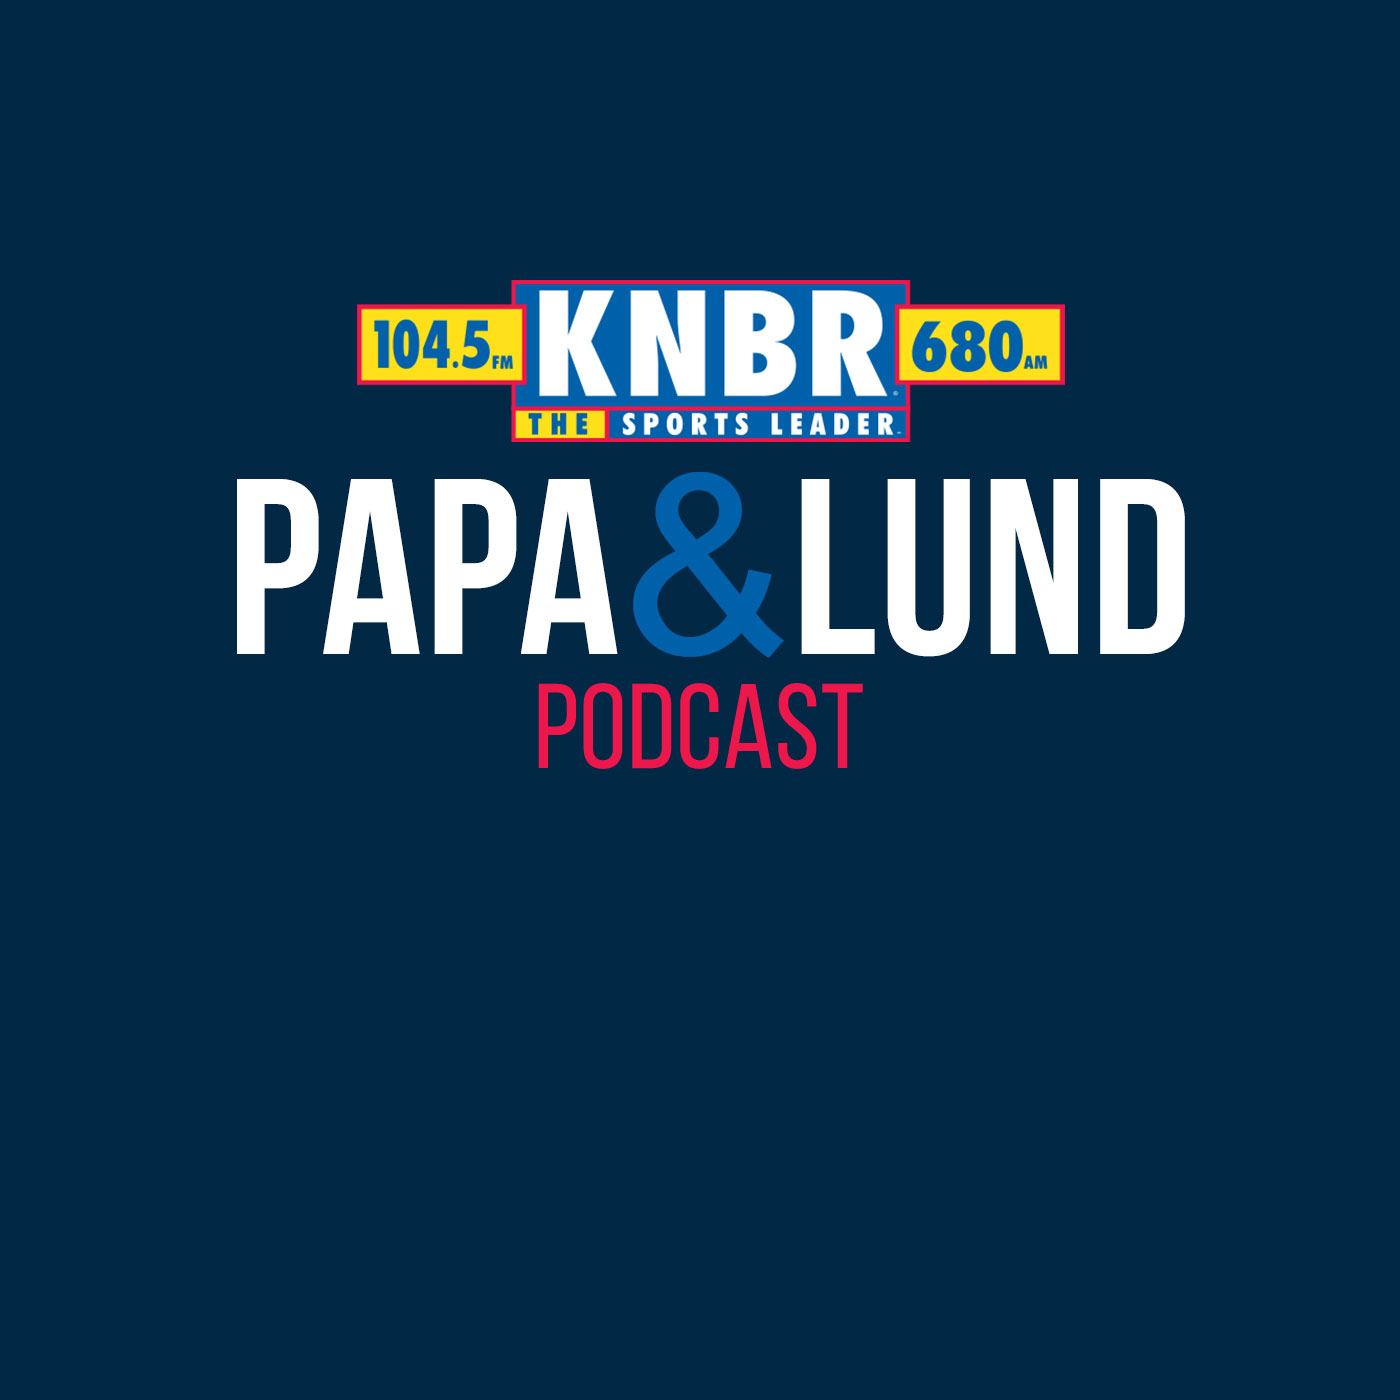 11-2 Dennis Brown joins Papa & Lund to discuss the 49ers entering the bye week at the perfect time and the potential return of several 49ers after the Bye